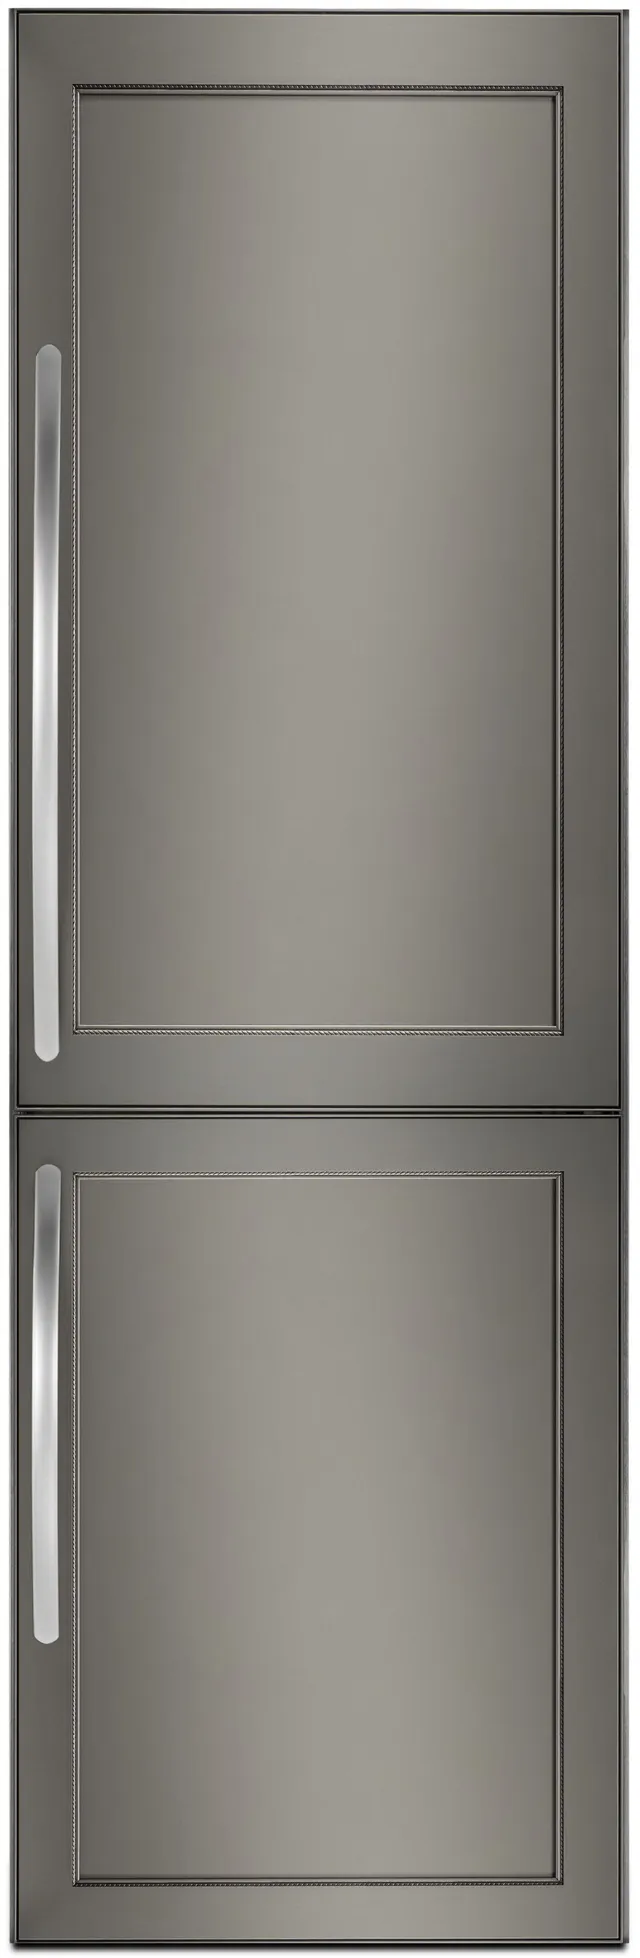 Front view of the KitchenAid KBBX104EPA built-in bottom mount refrigerator 